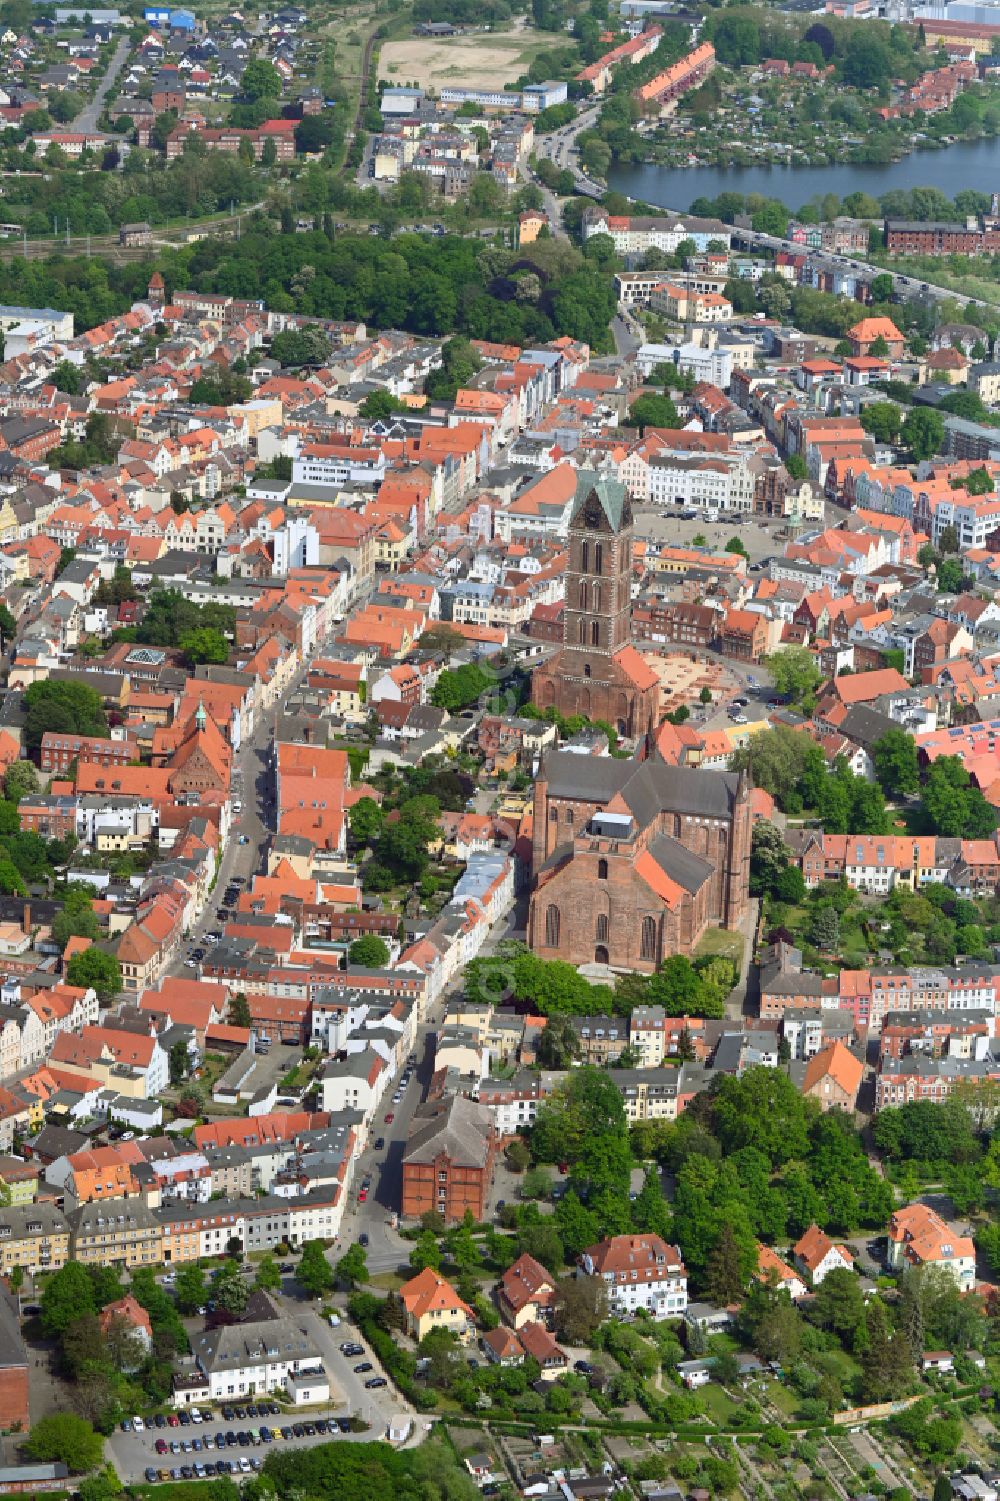 Hansestadt Wismar from the bird's eye view: Old Town area and city center in Wismar in the state Mecklenburg - Western Pomerania